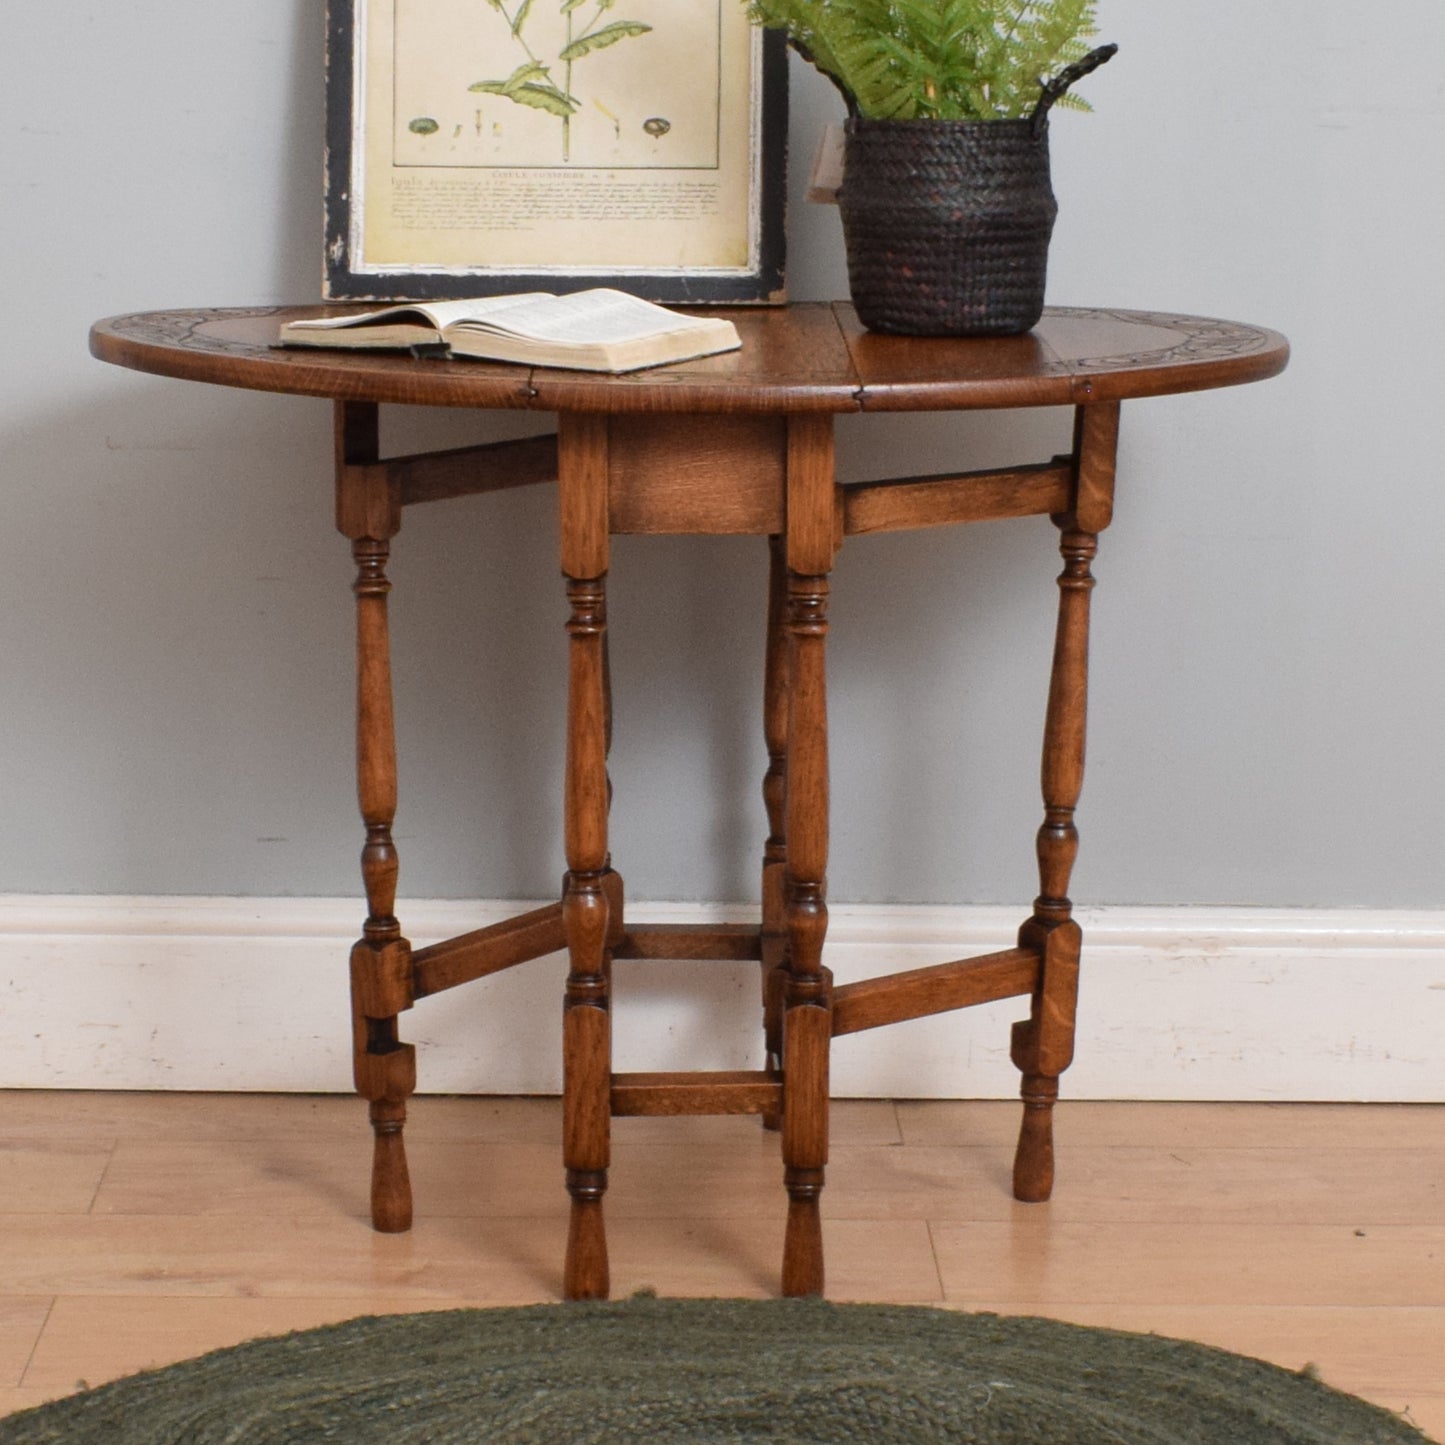 Small Carved Drop-Leaf Table